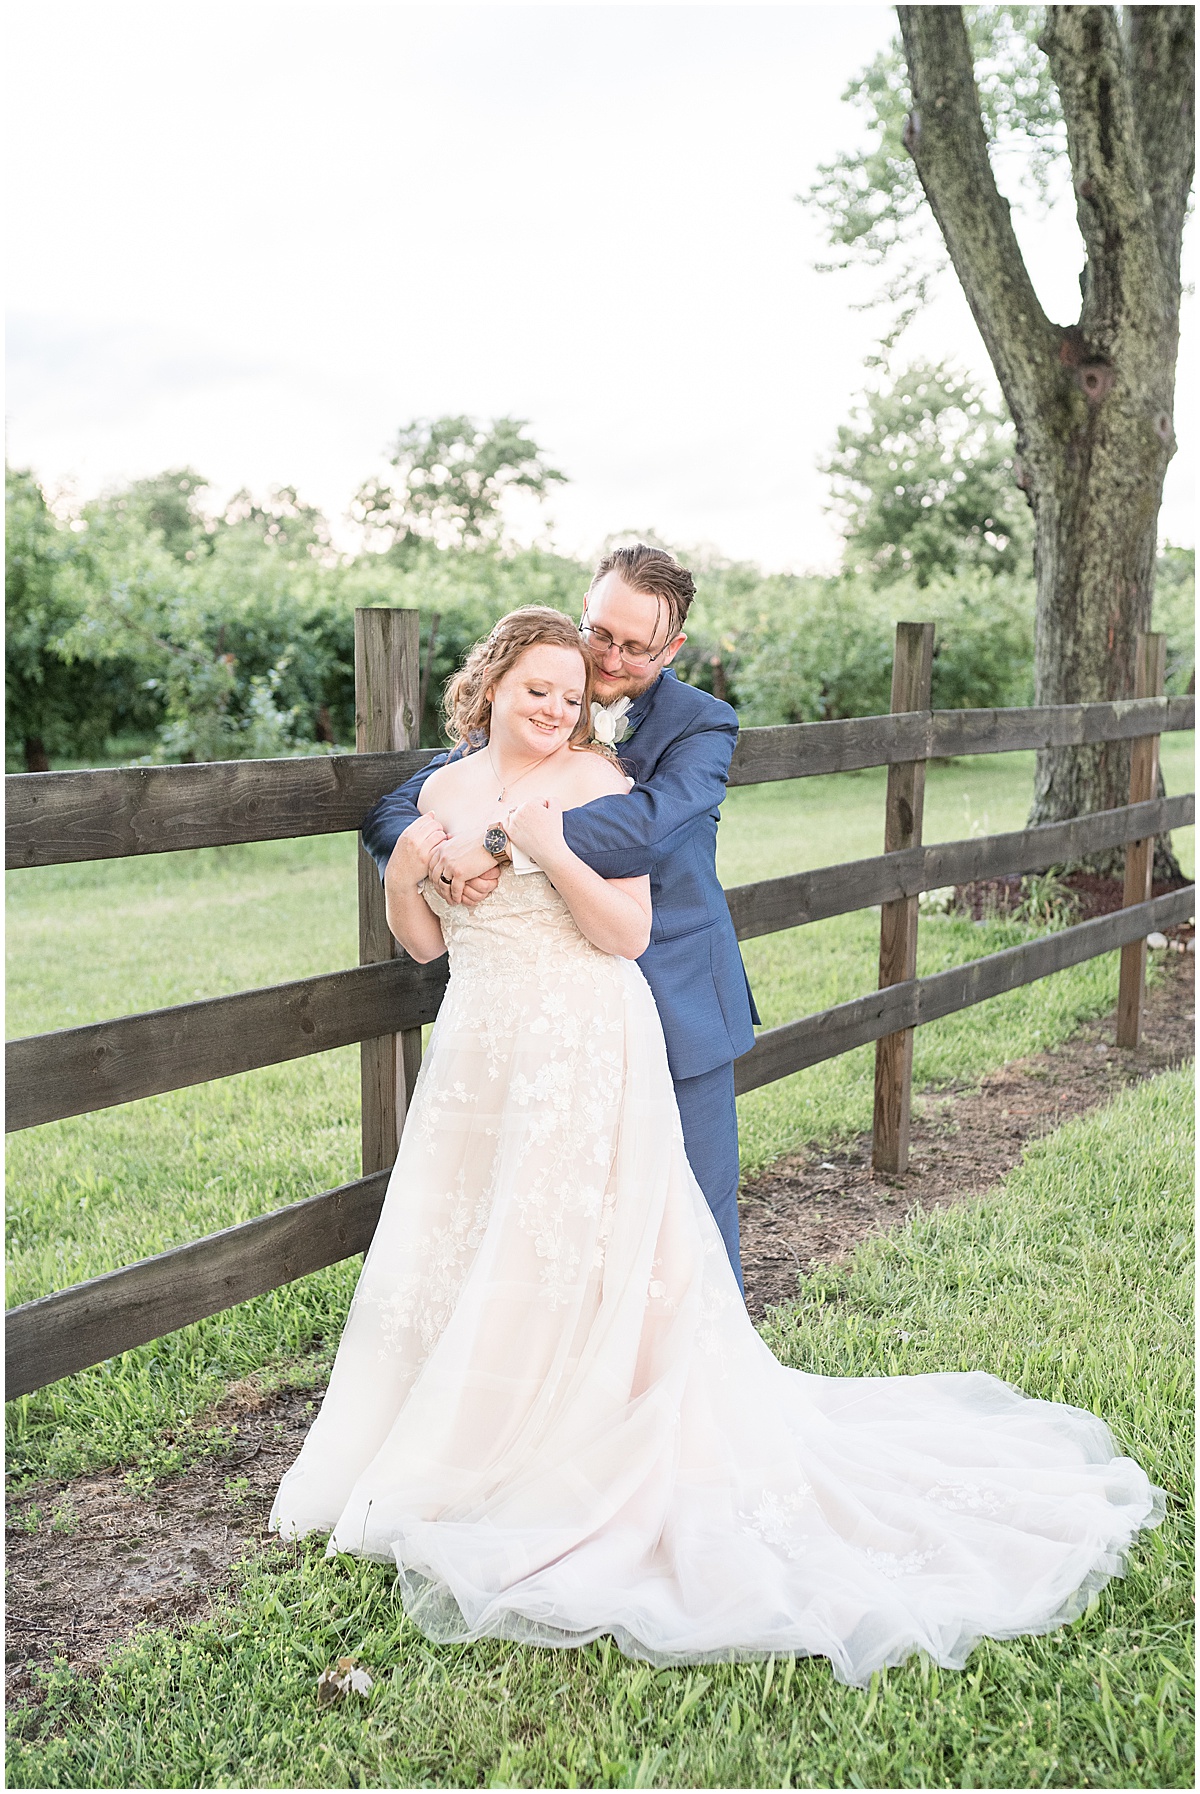 Bride and groom sunset photos at County Line Orchard wedding in Hobart, Indiana